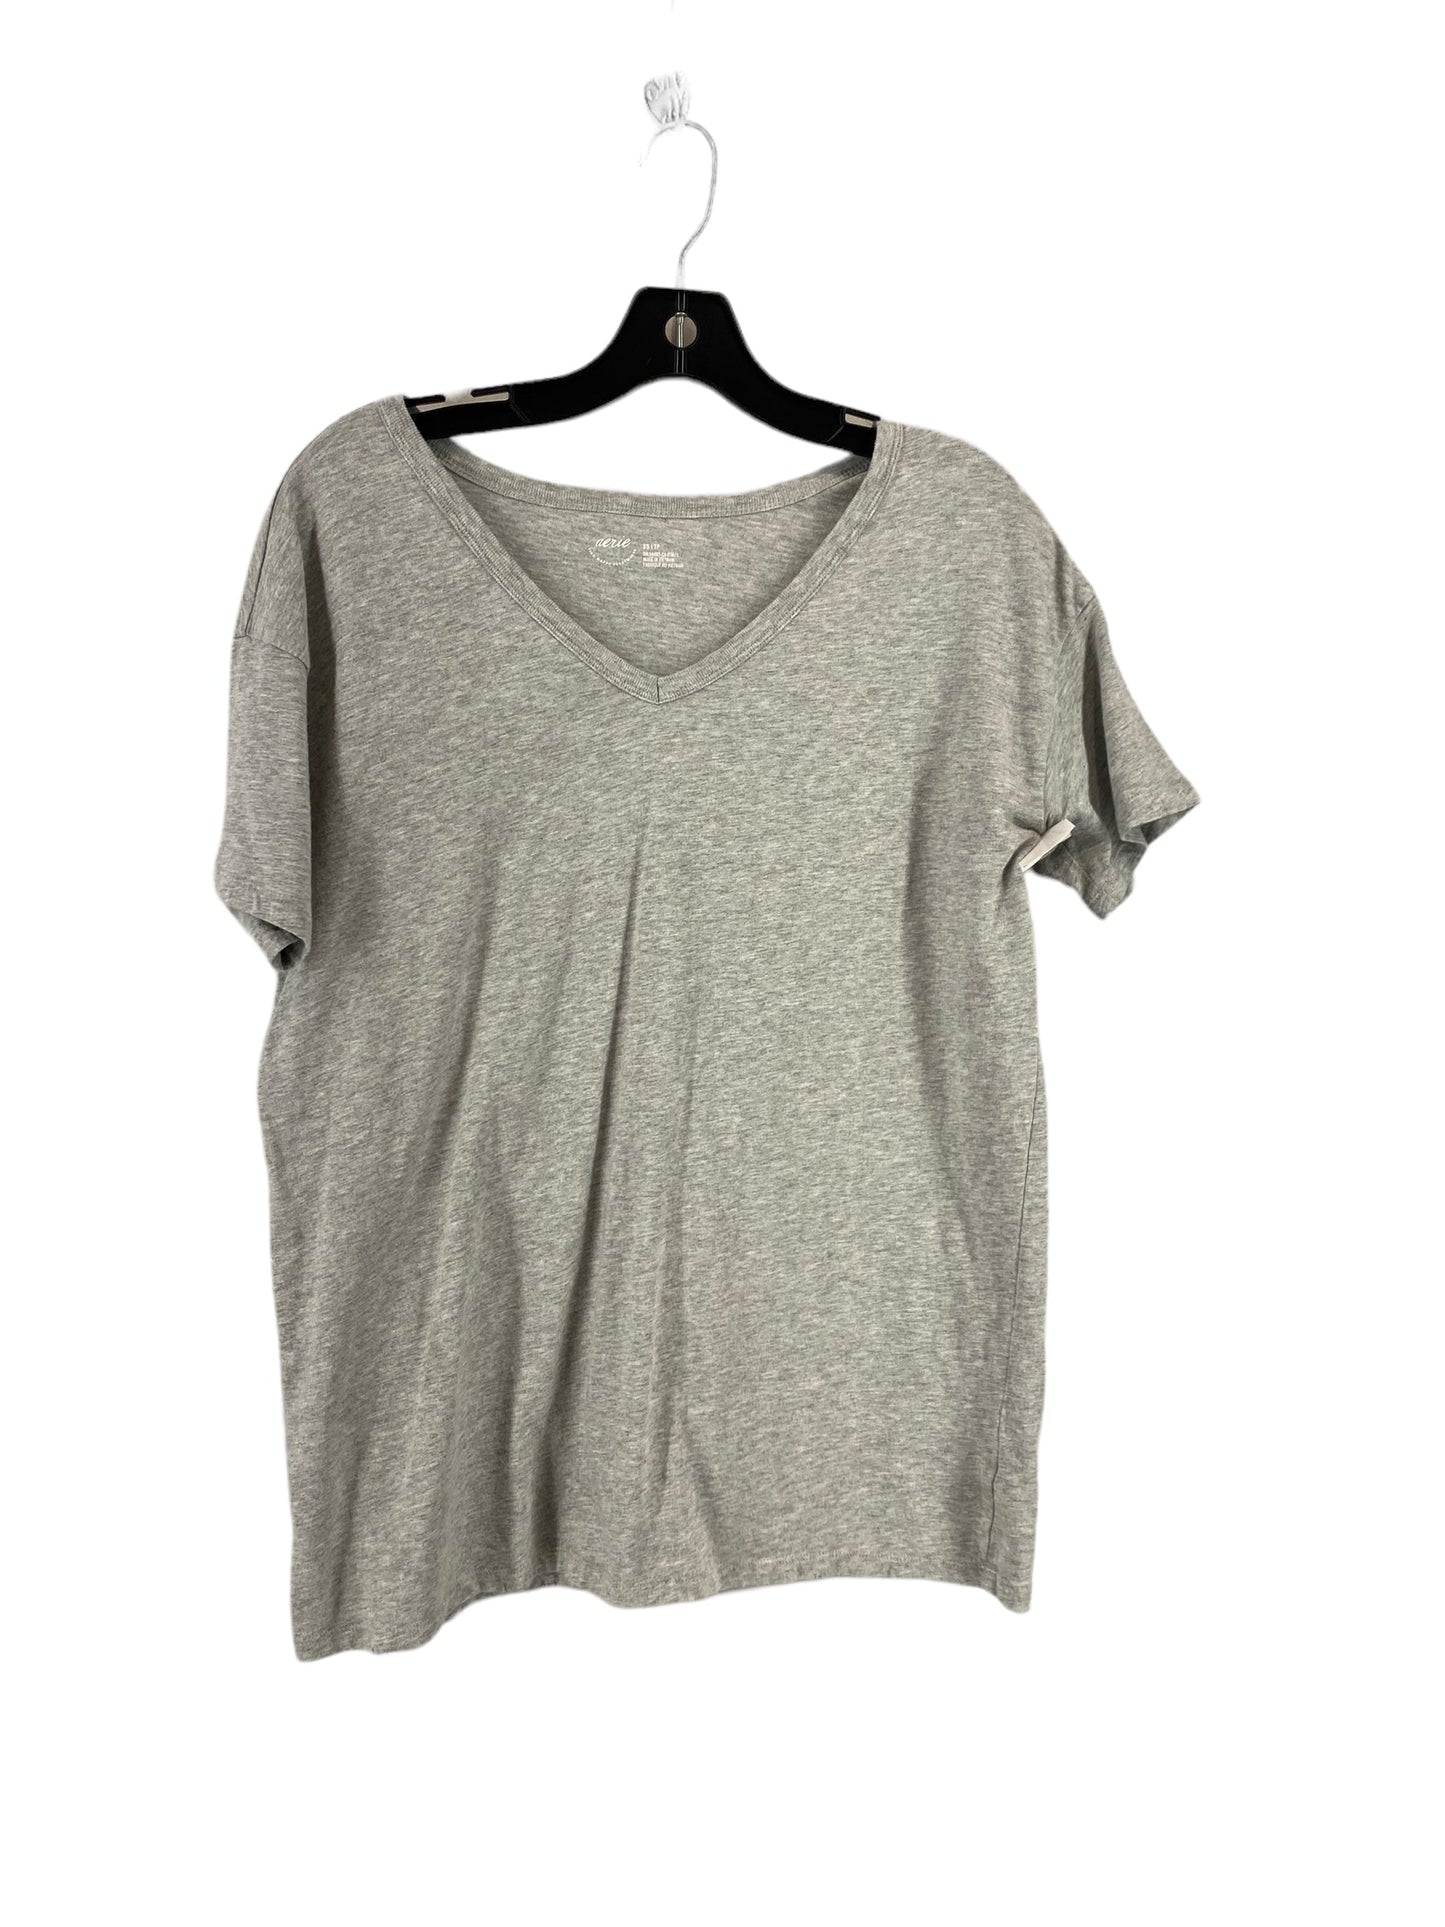 Grey Top Short Sleeve Aerie, Size Xs